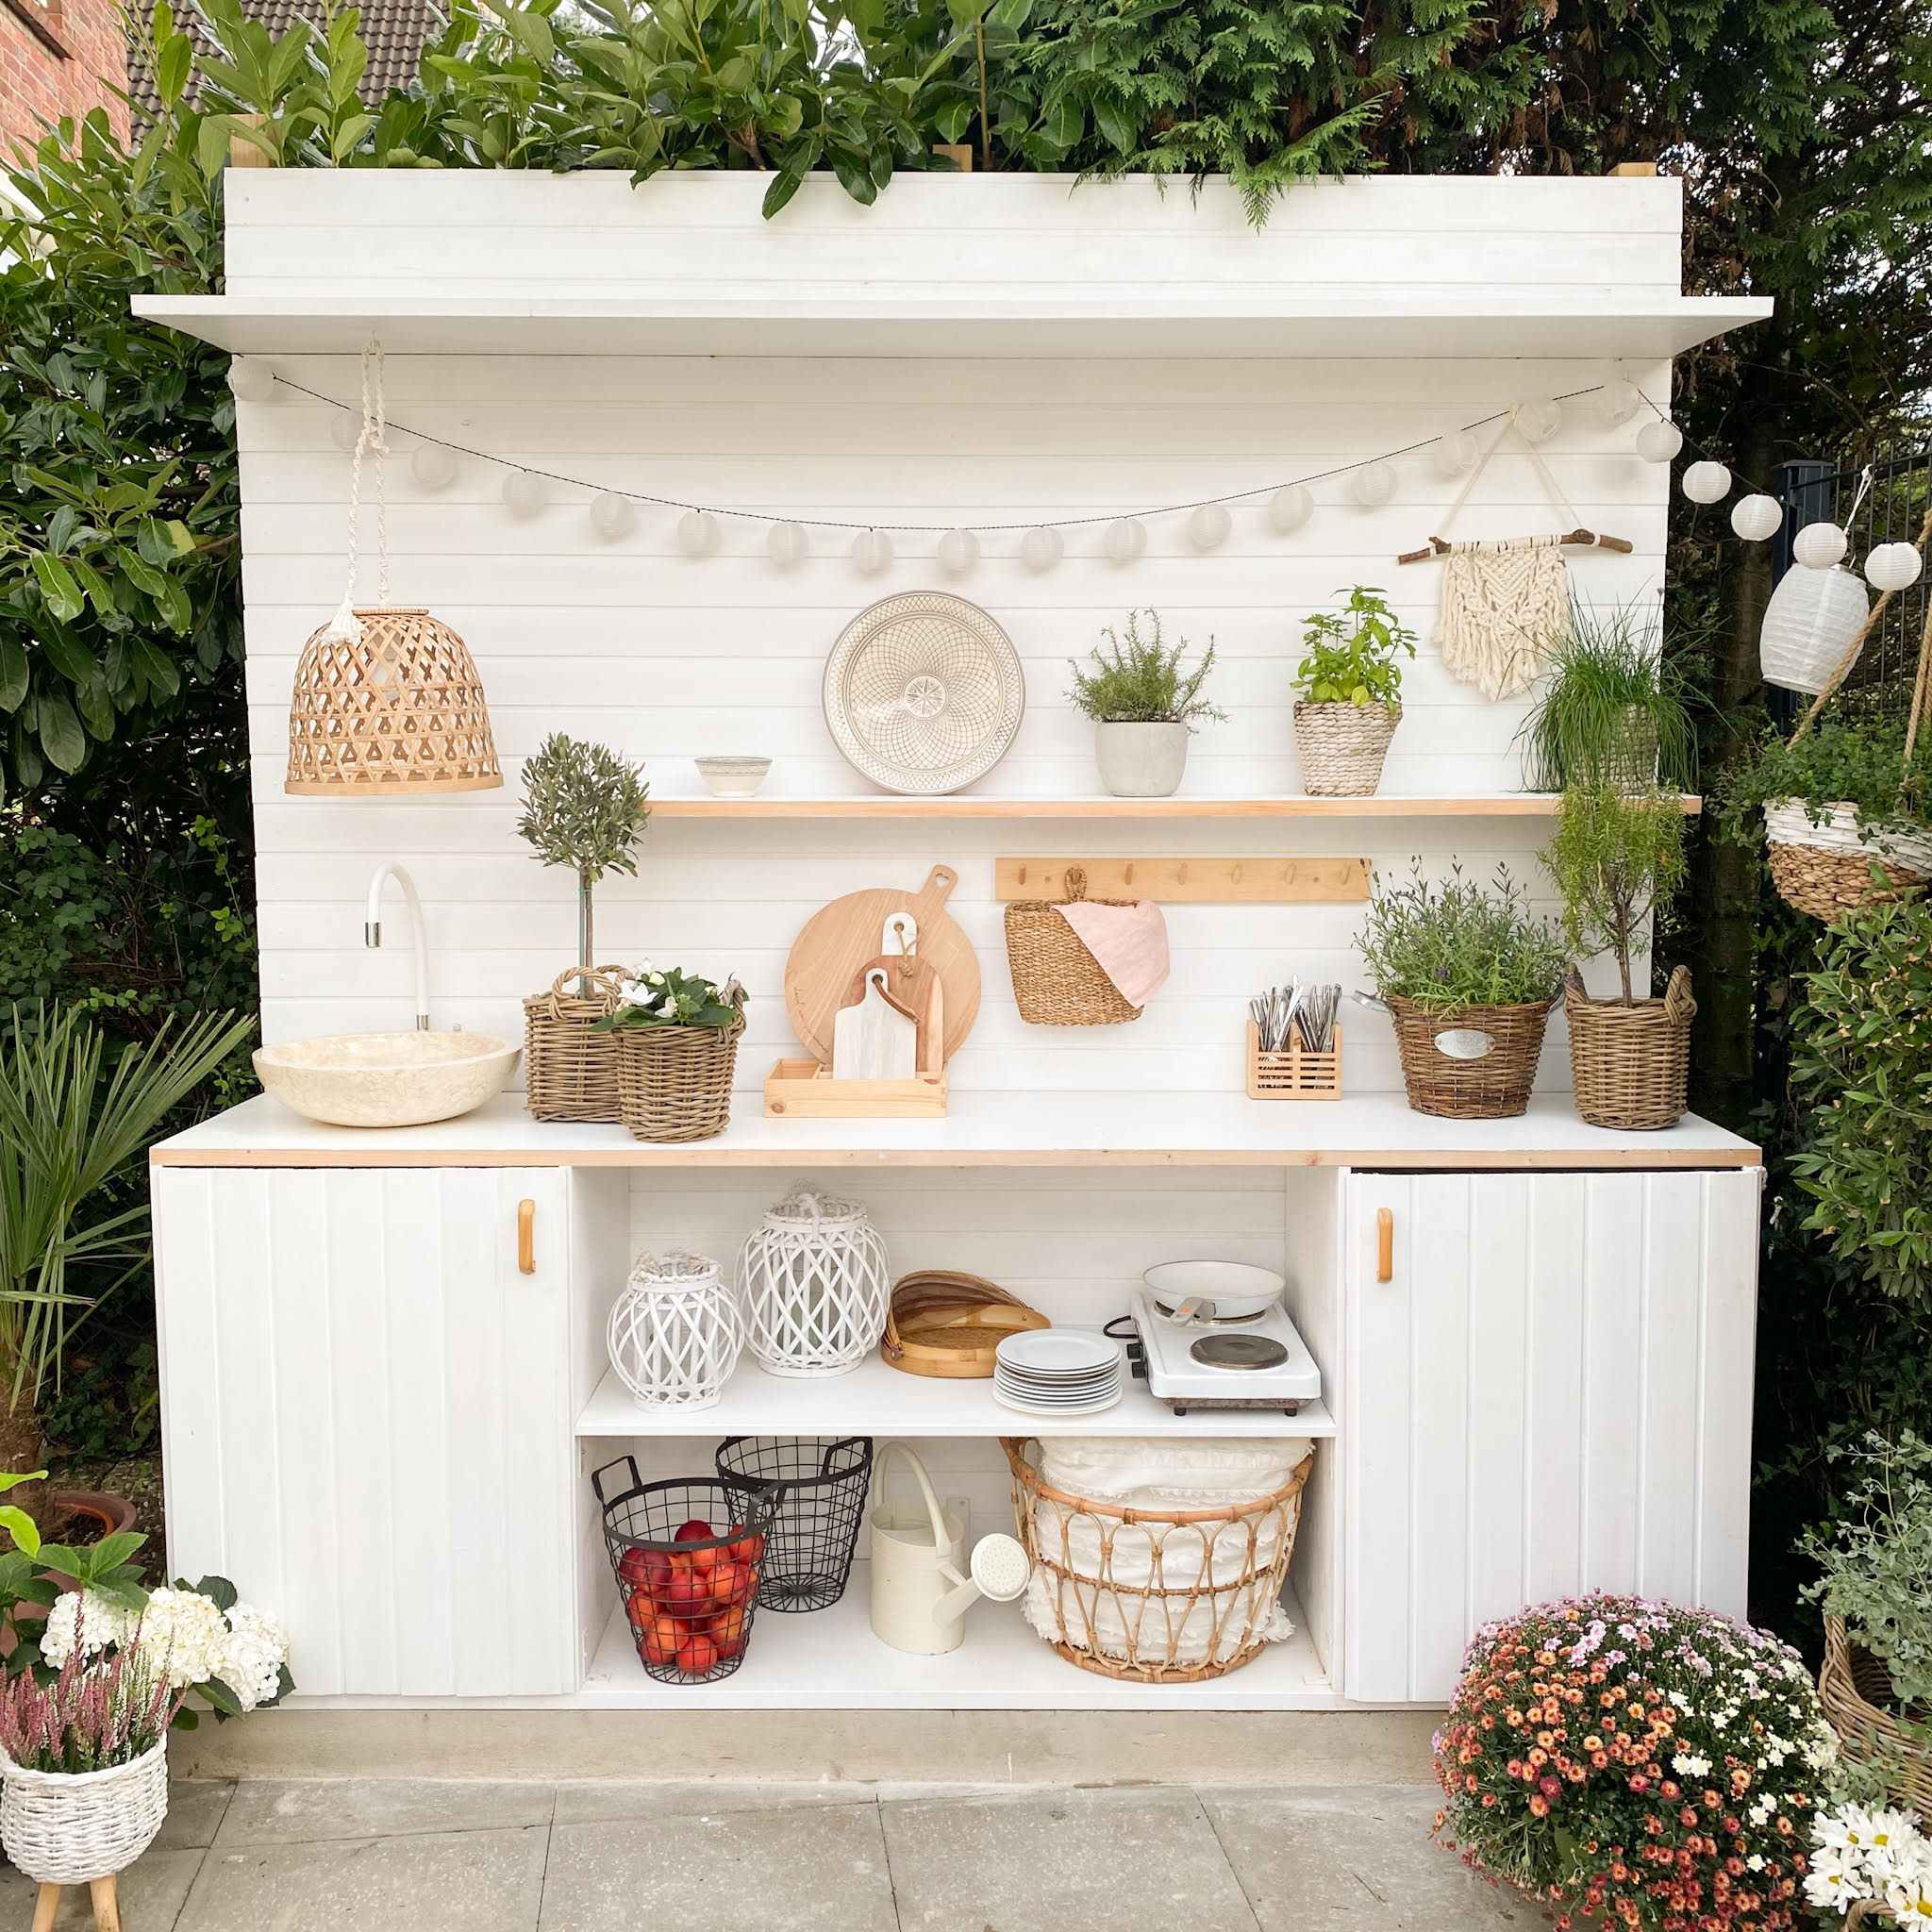 How to Create an Outdoor Kitchen - The New York Times